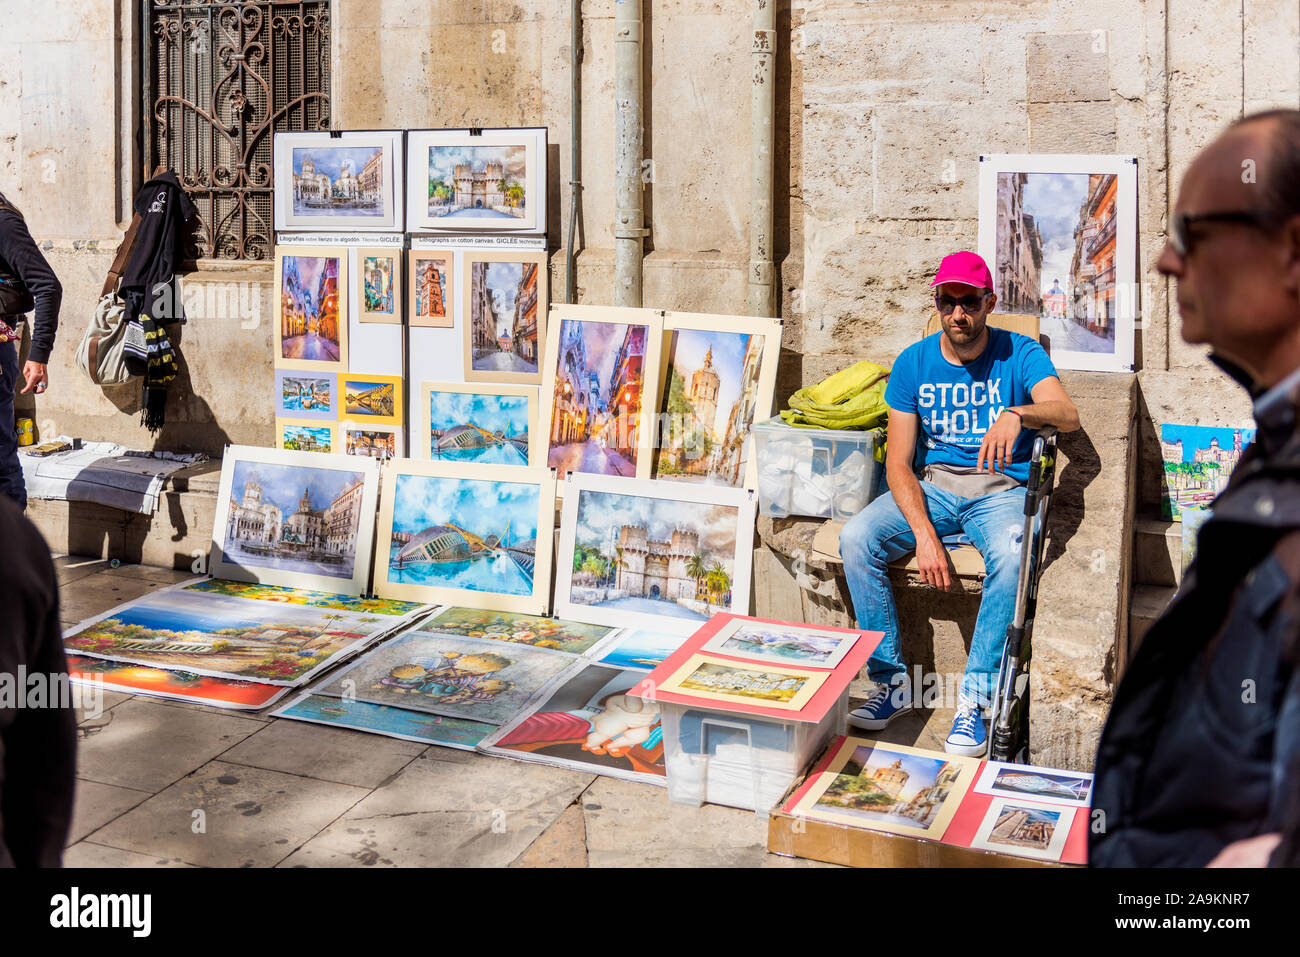 Artist displaying and aiming to sell his paintings in a downtown street of Valencia, Spain. Stock Photo